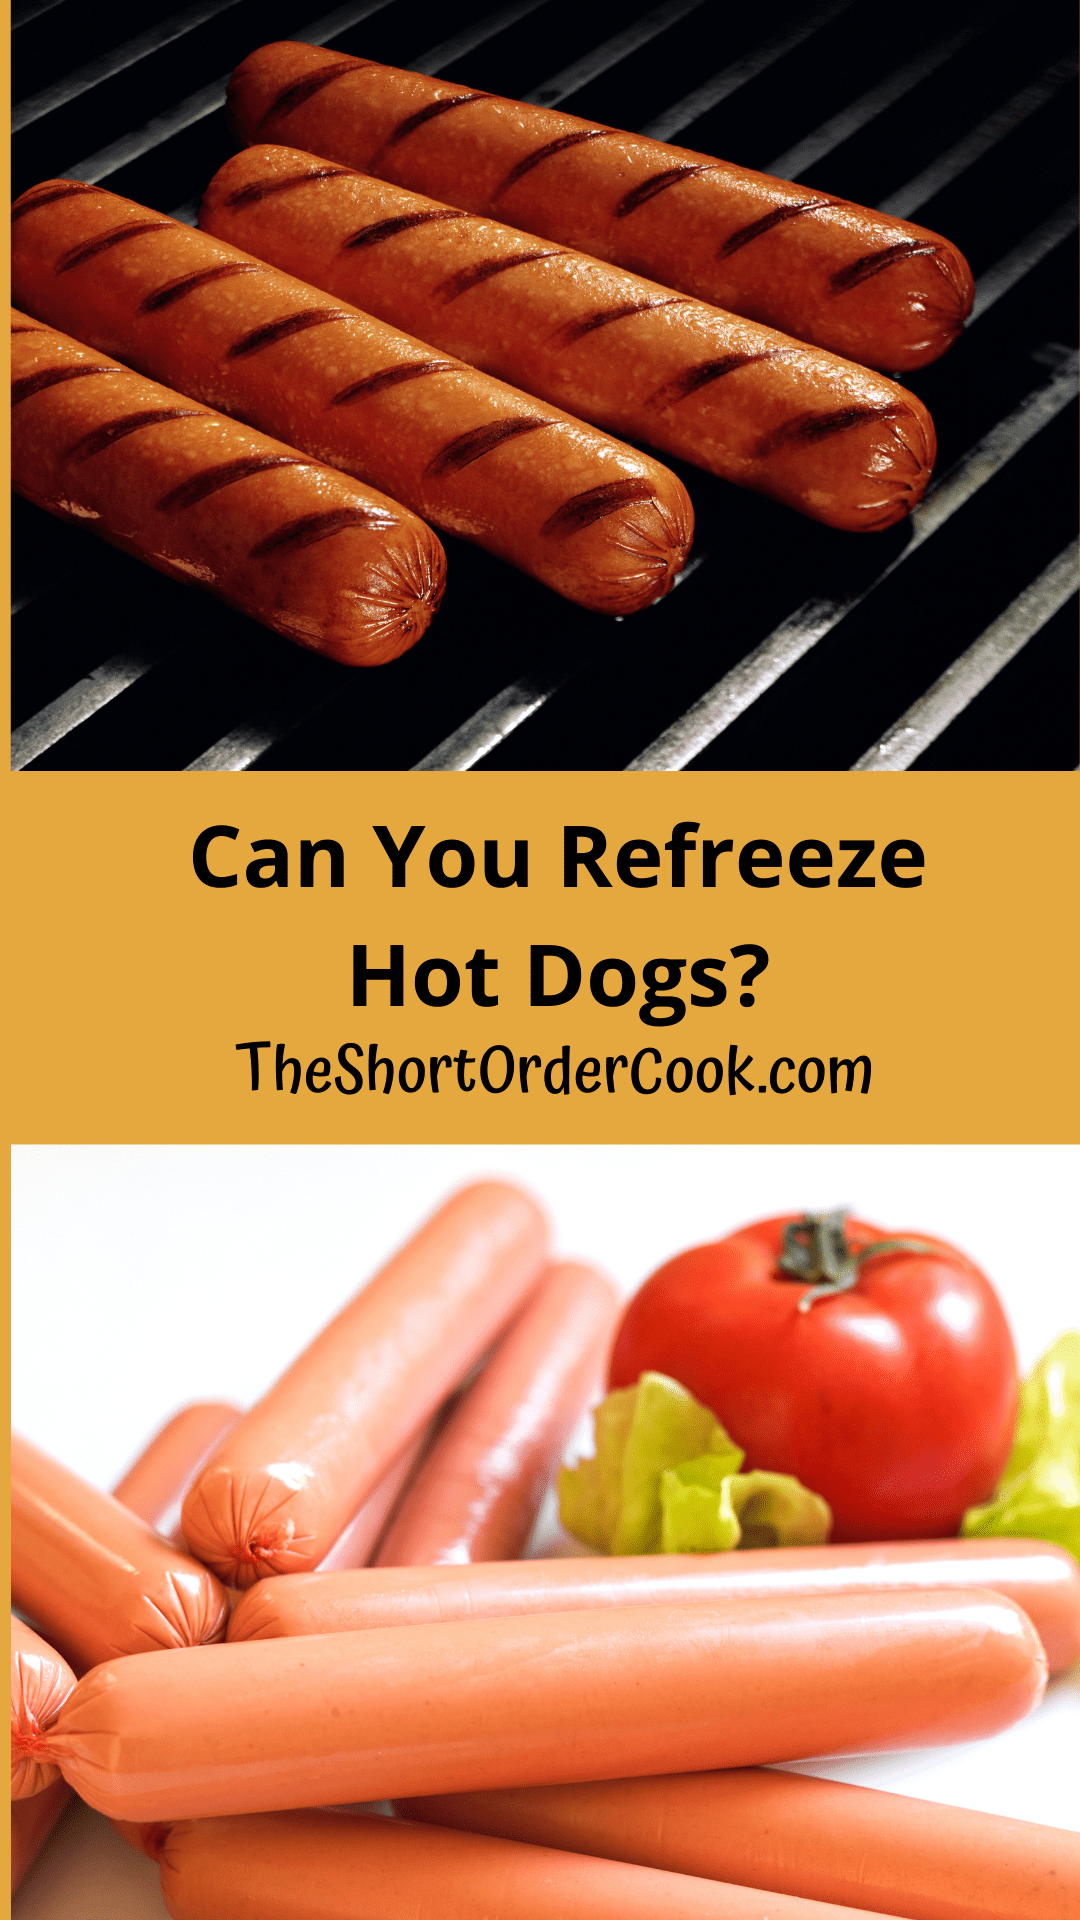 Grilled hot dogs on a bbq as top image and bottom images is raw hot dogs stacked up.